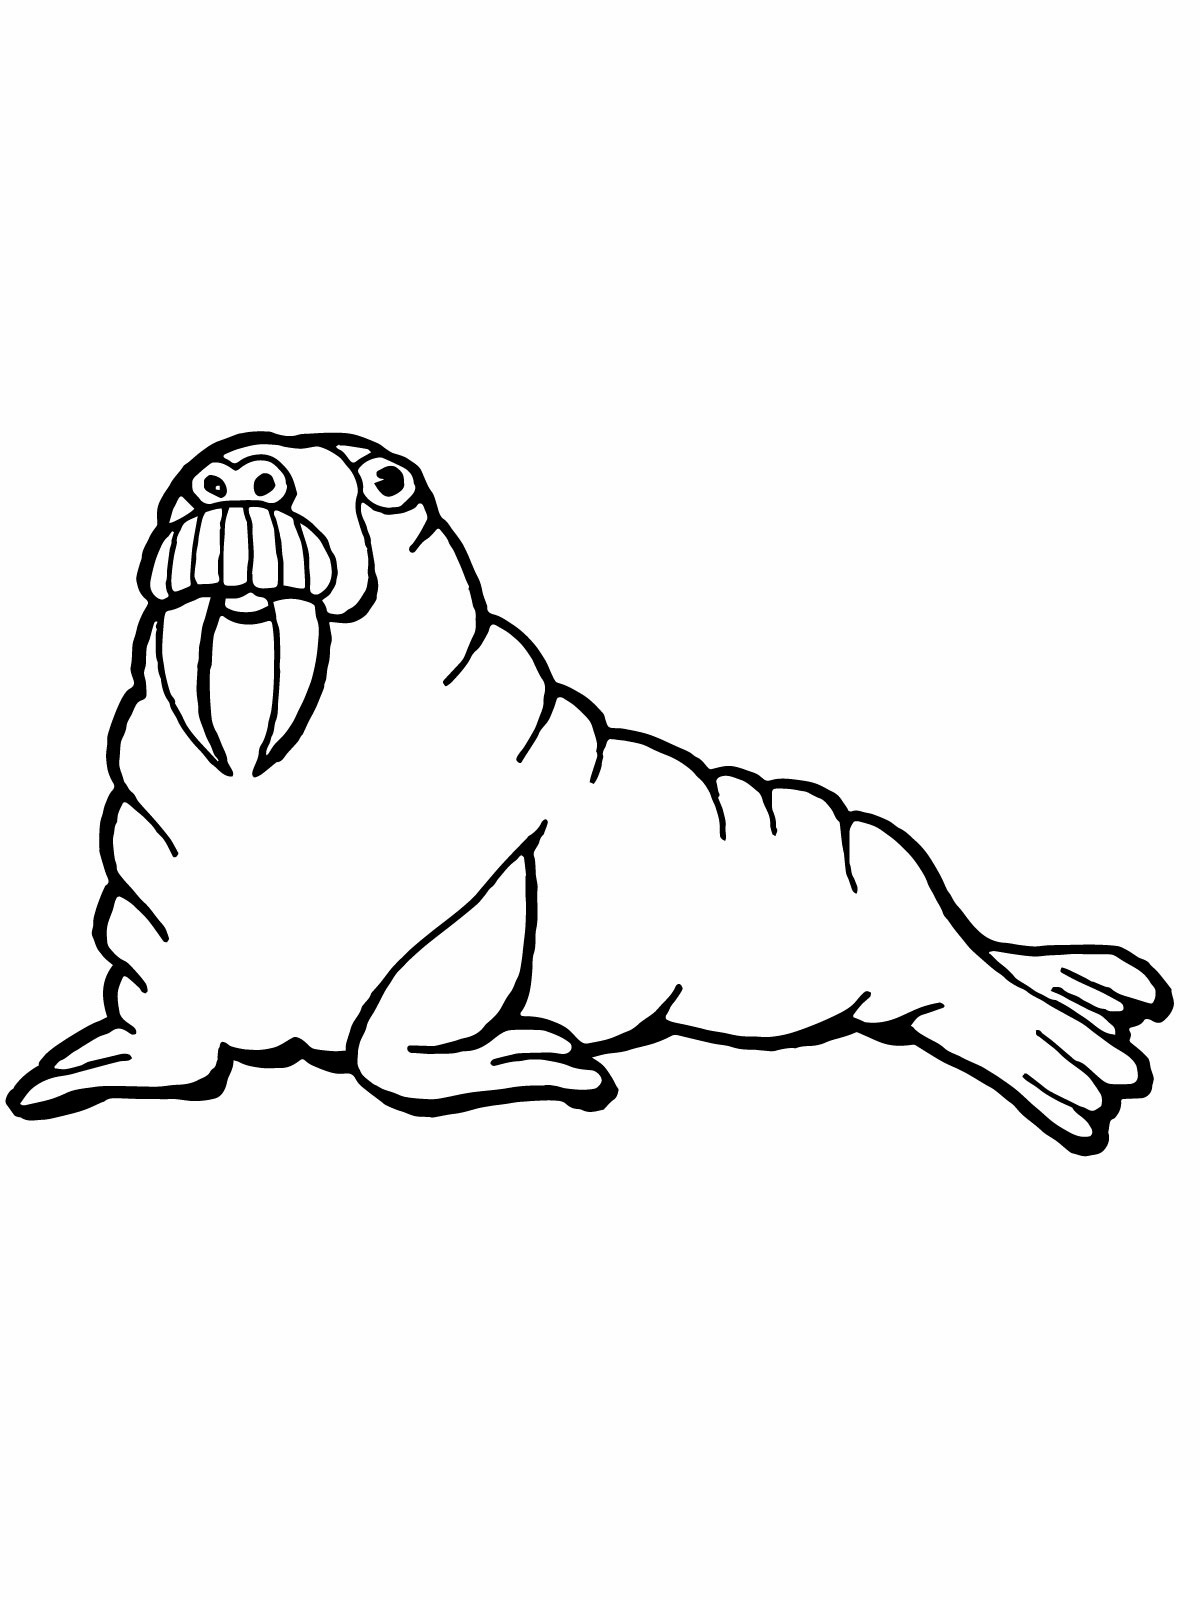 Download Free Printable Walrus Coloring Pages For Kids